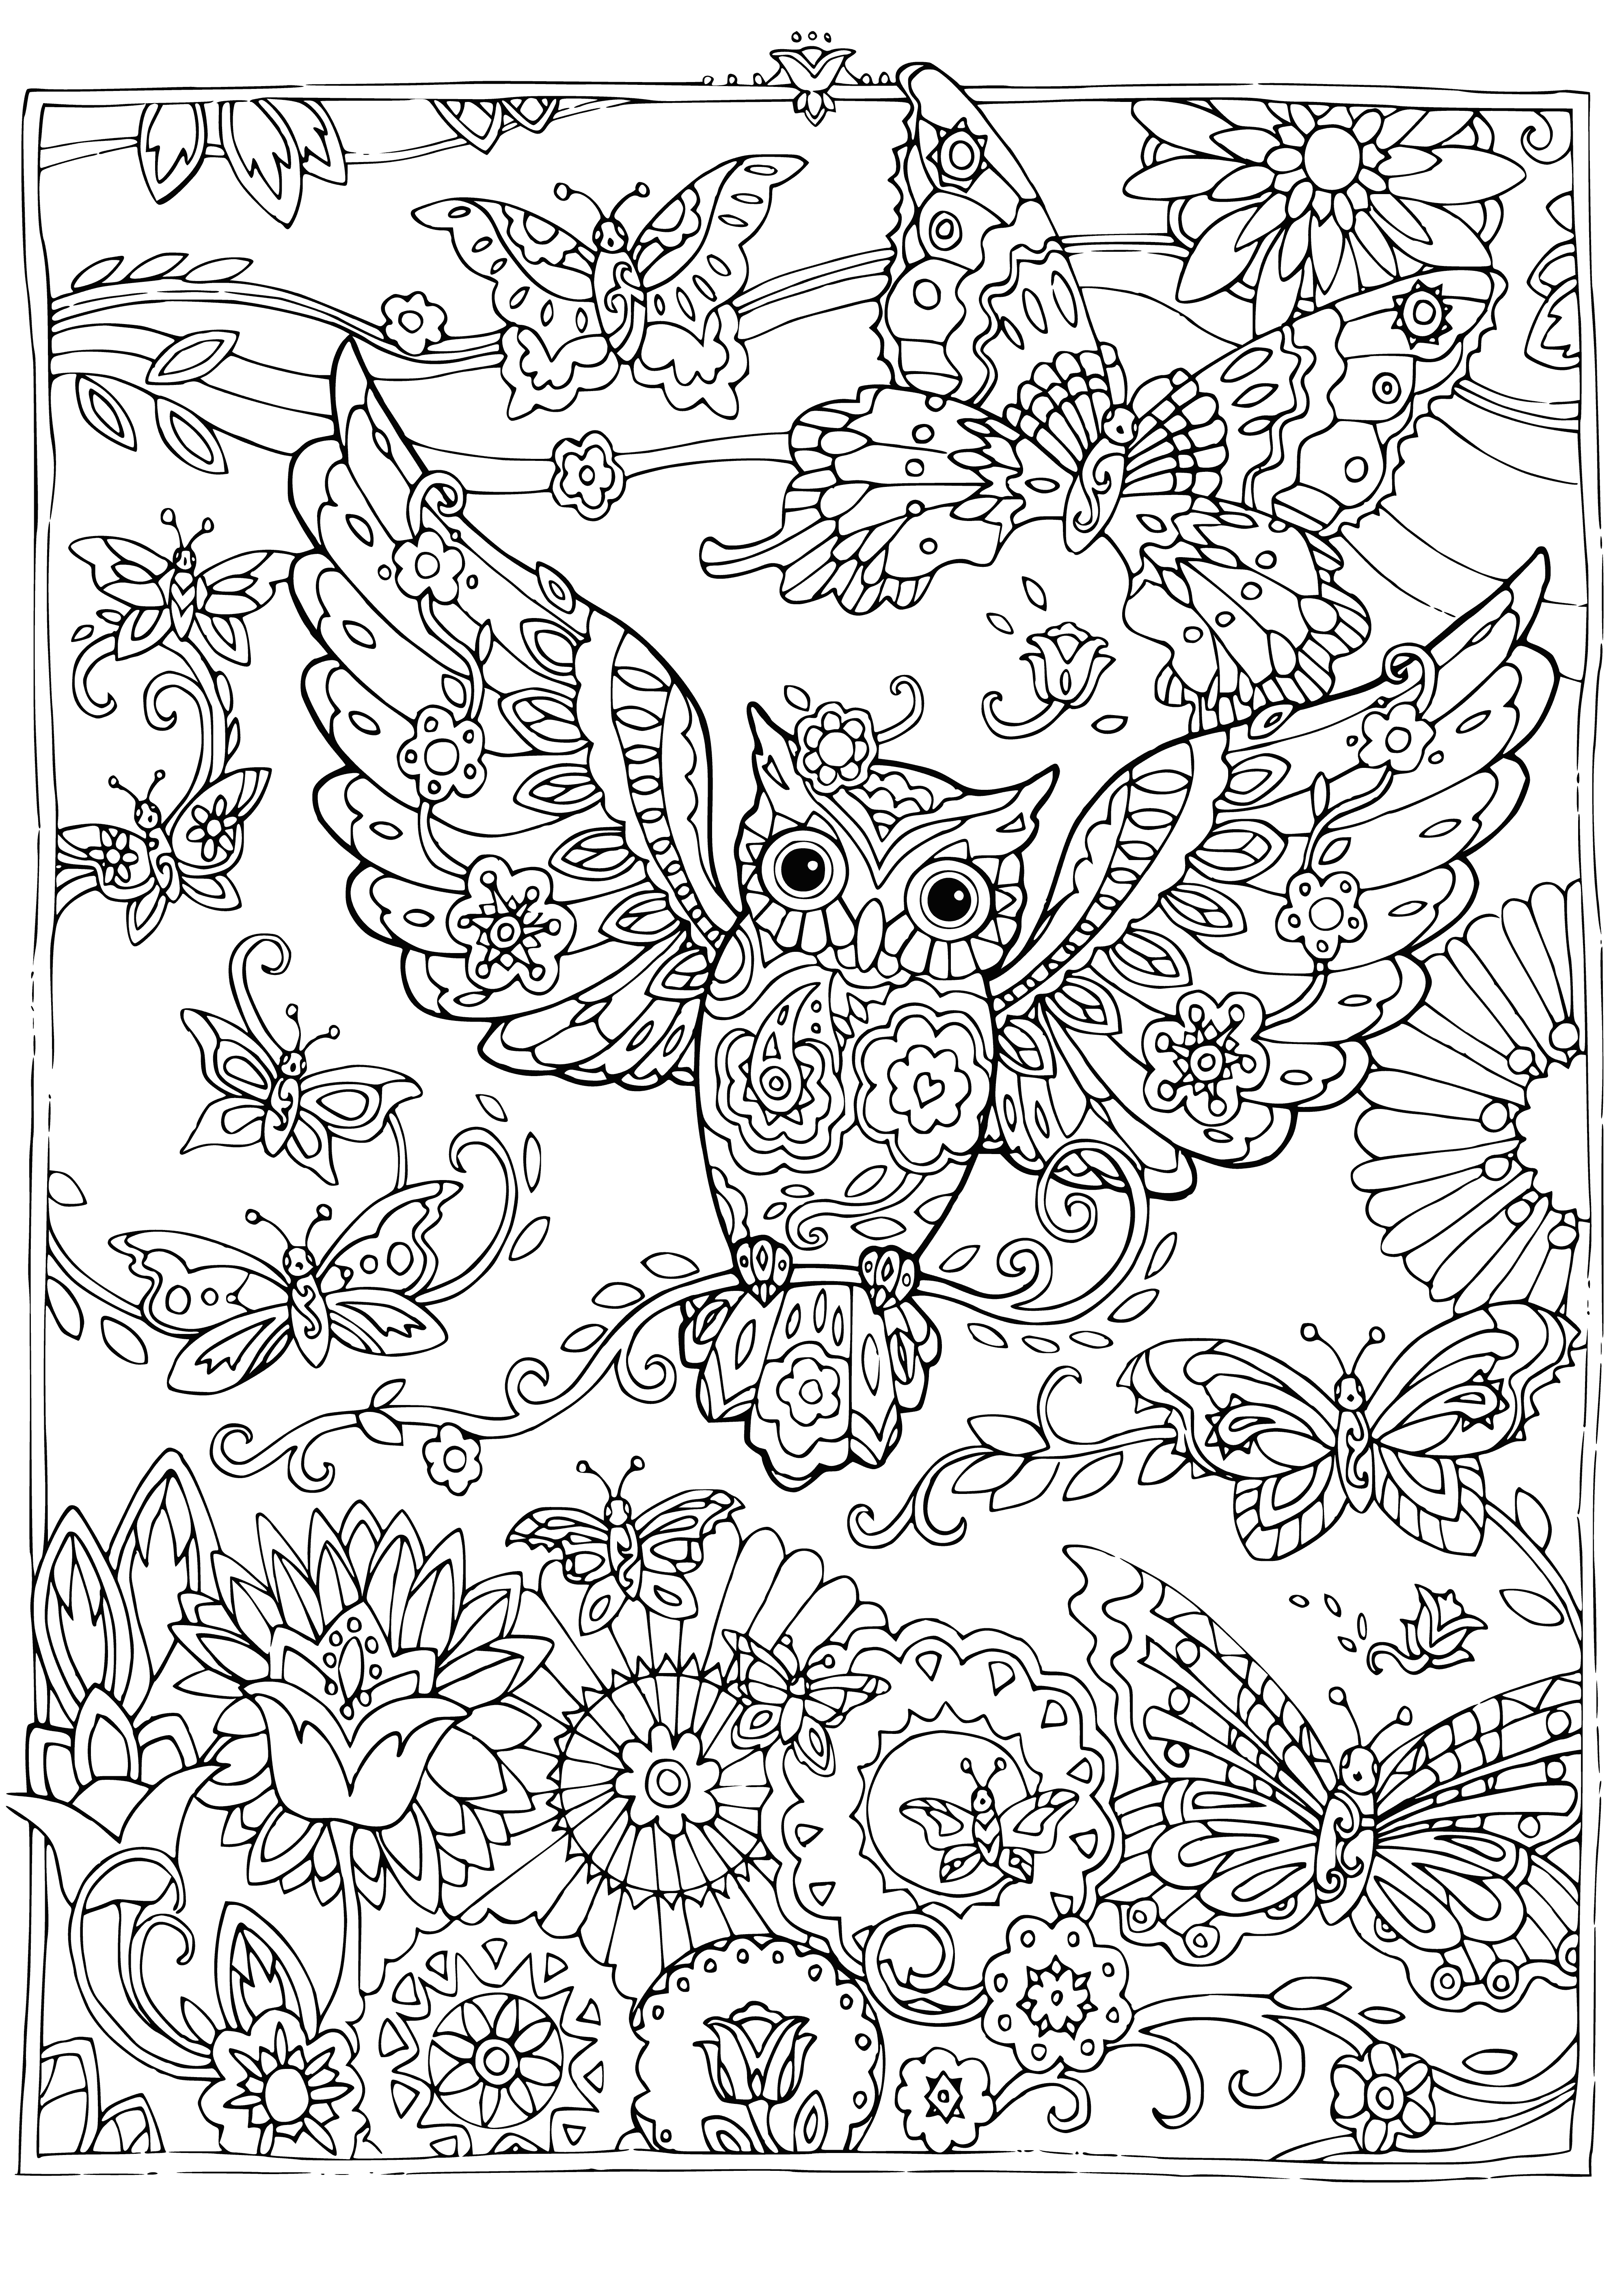 Butterfly and owl coloring page